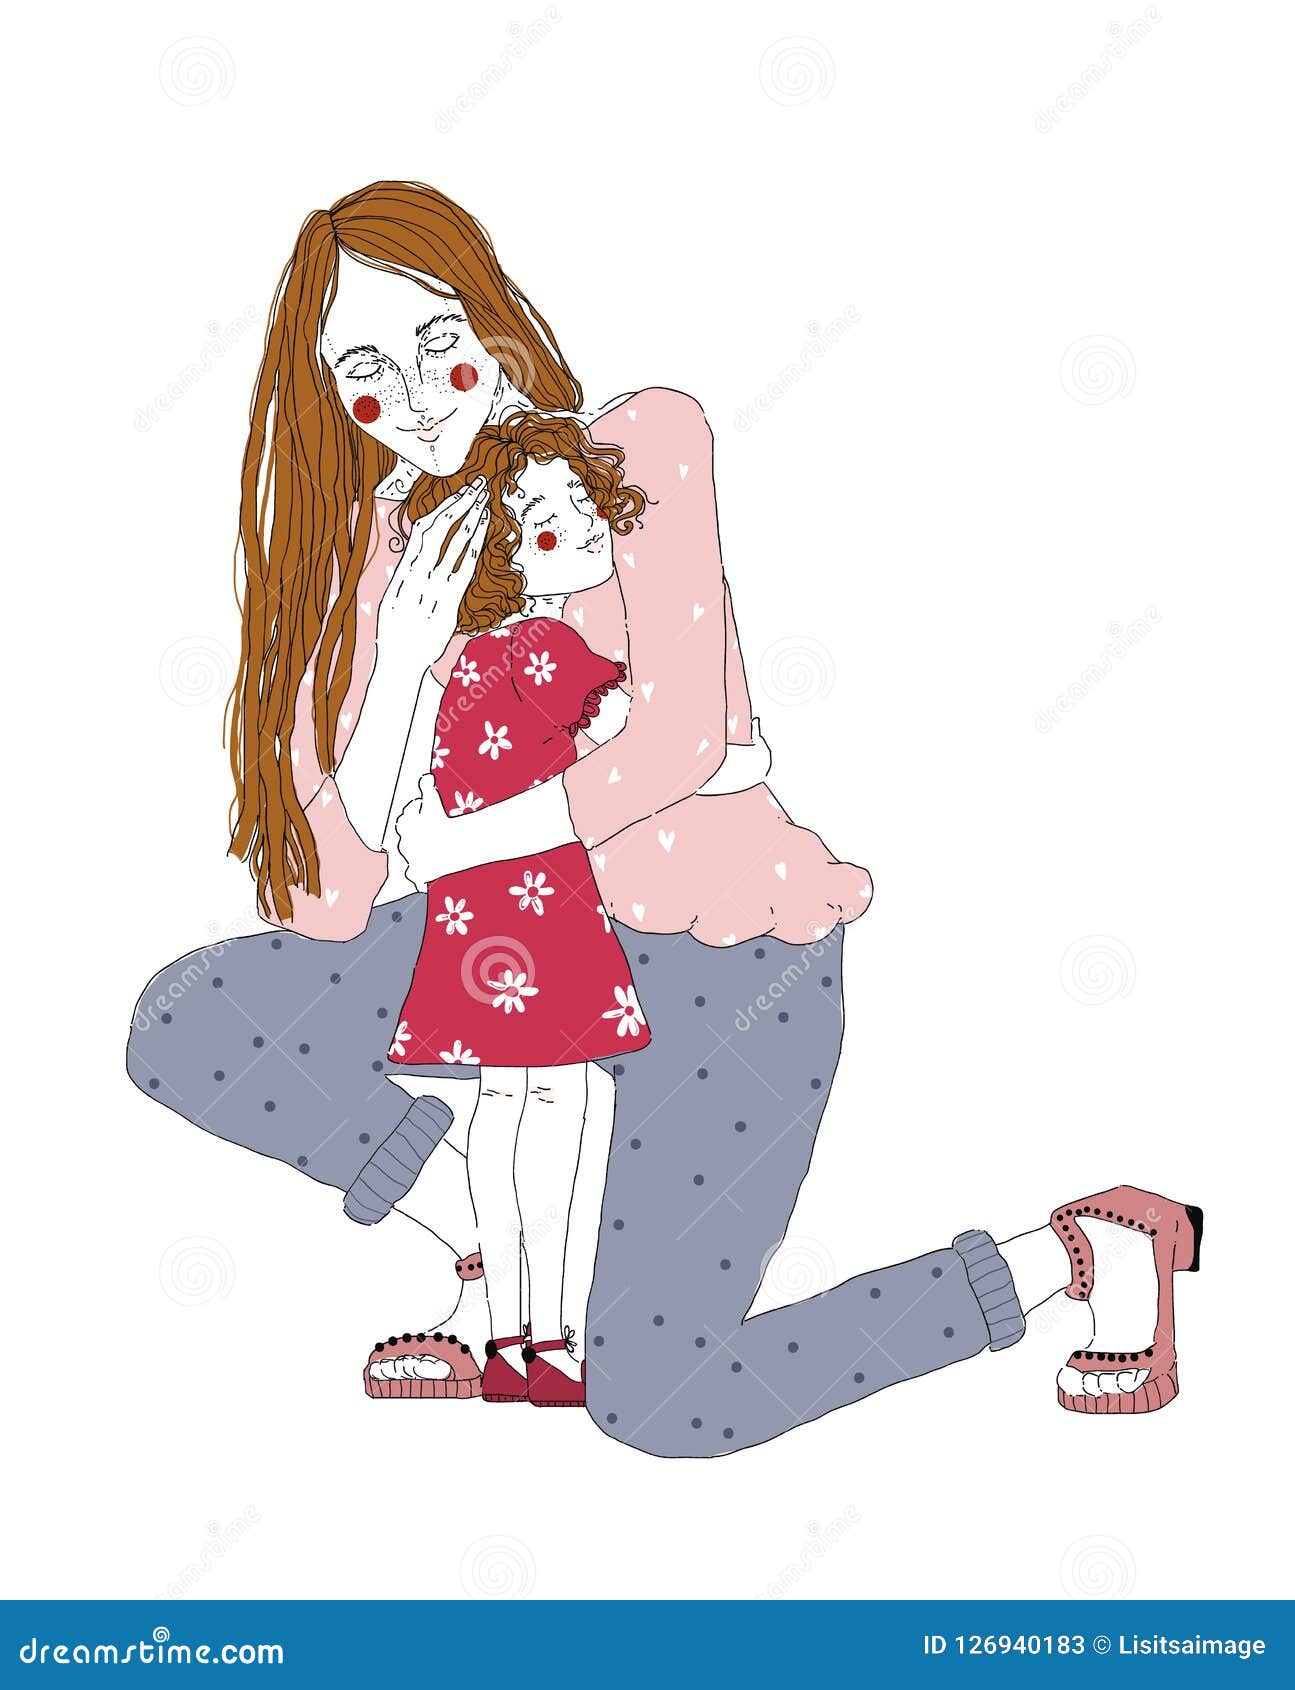 young redhead woman cuddle preschool girl. mother huggs her little doughte and express care and love. happy mothers day